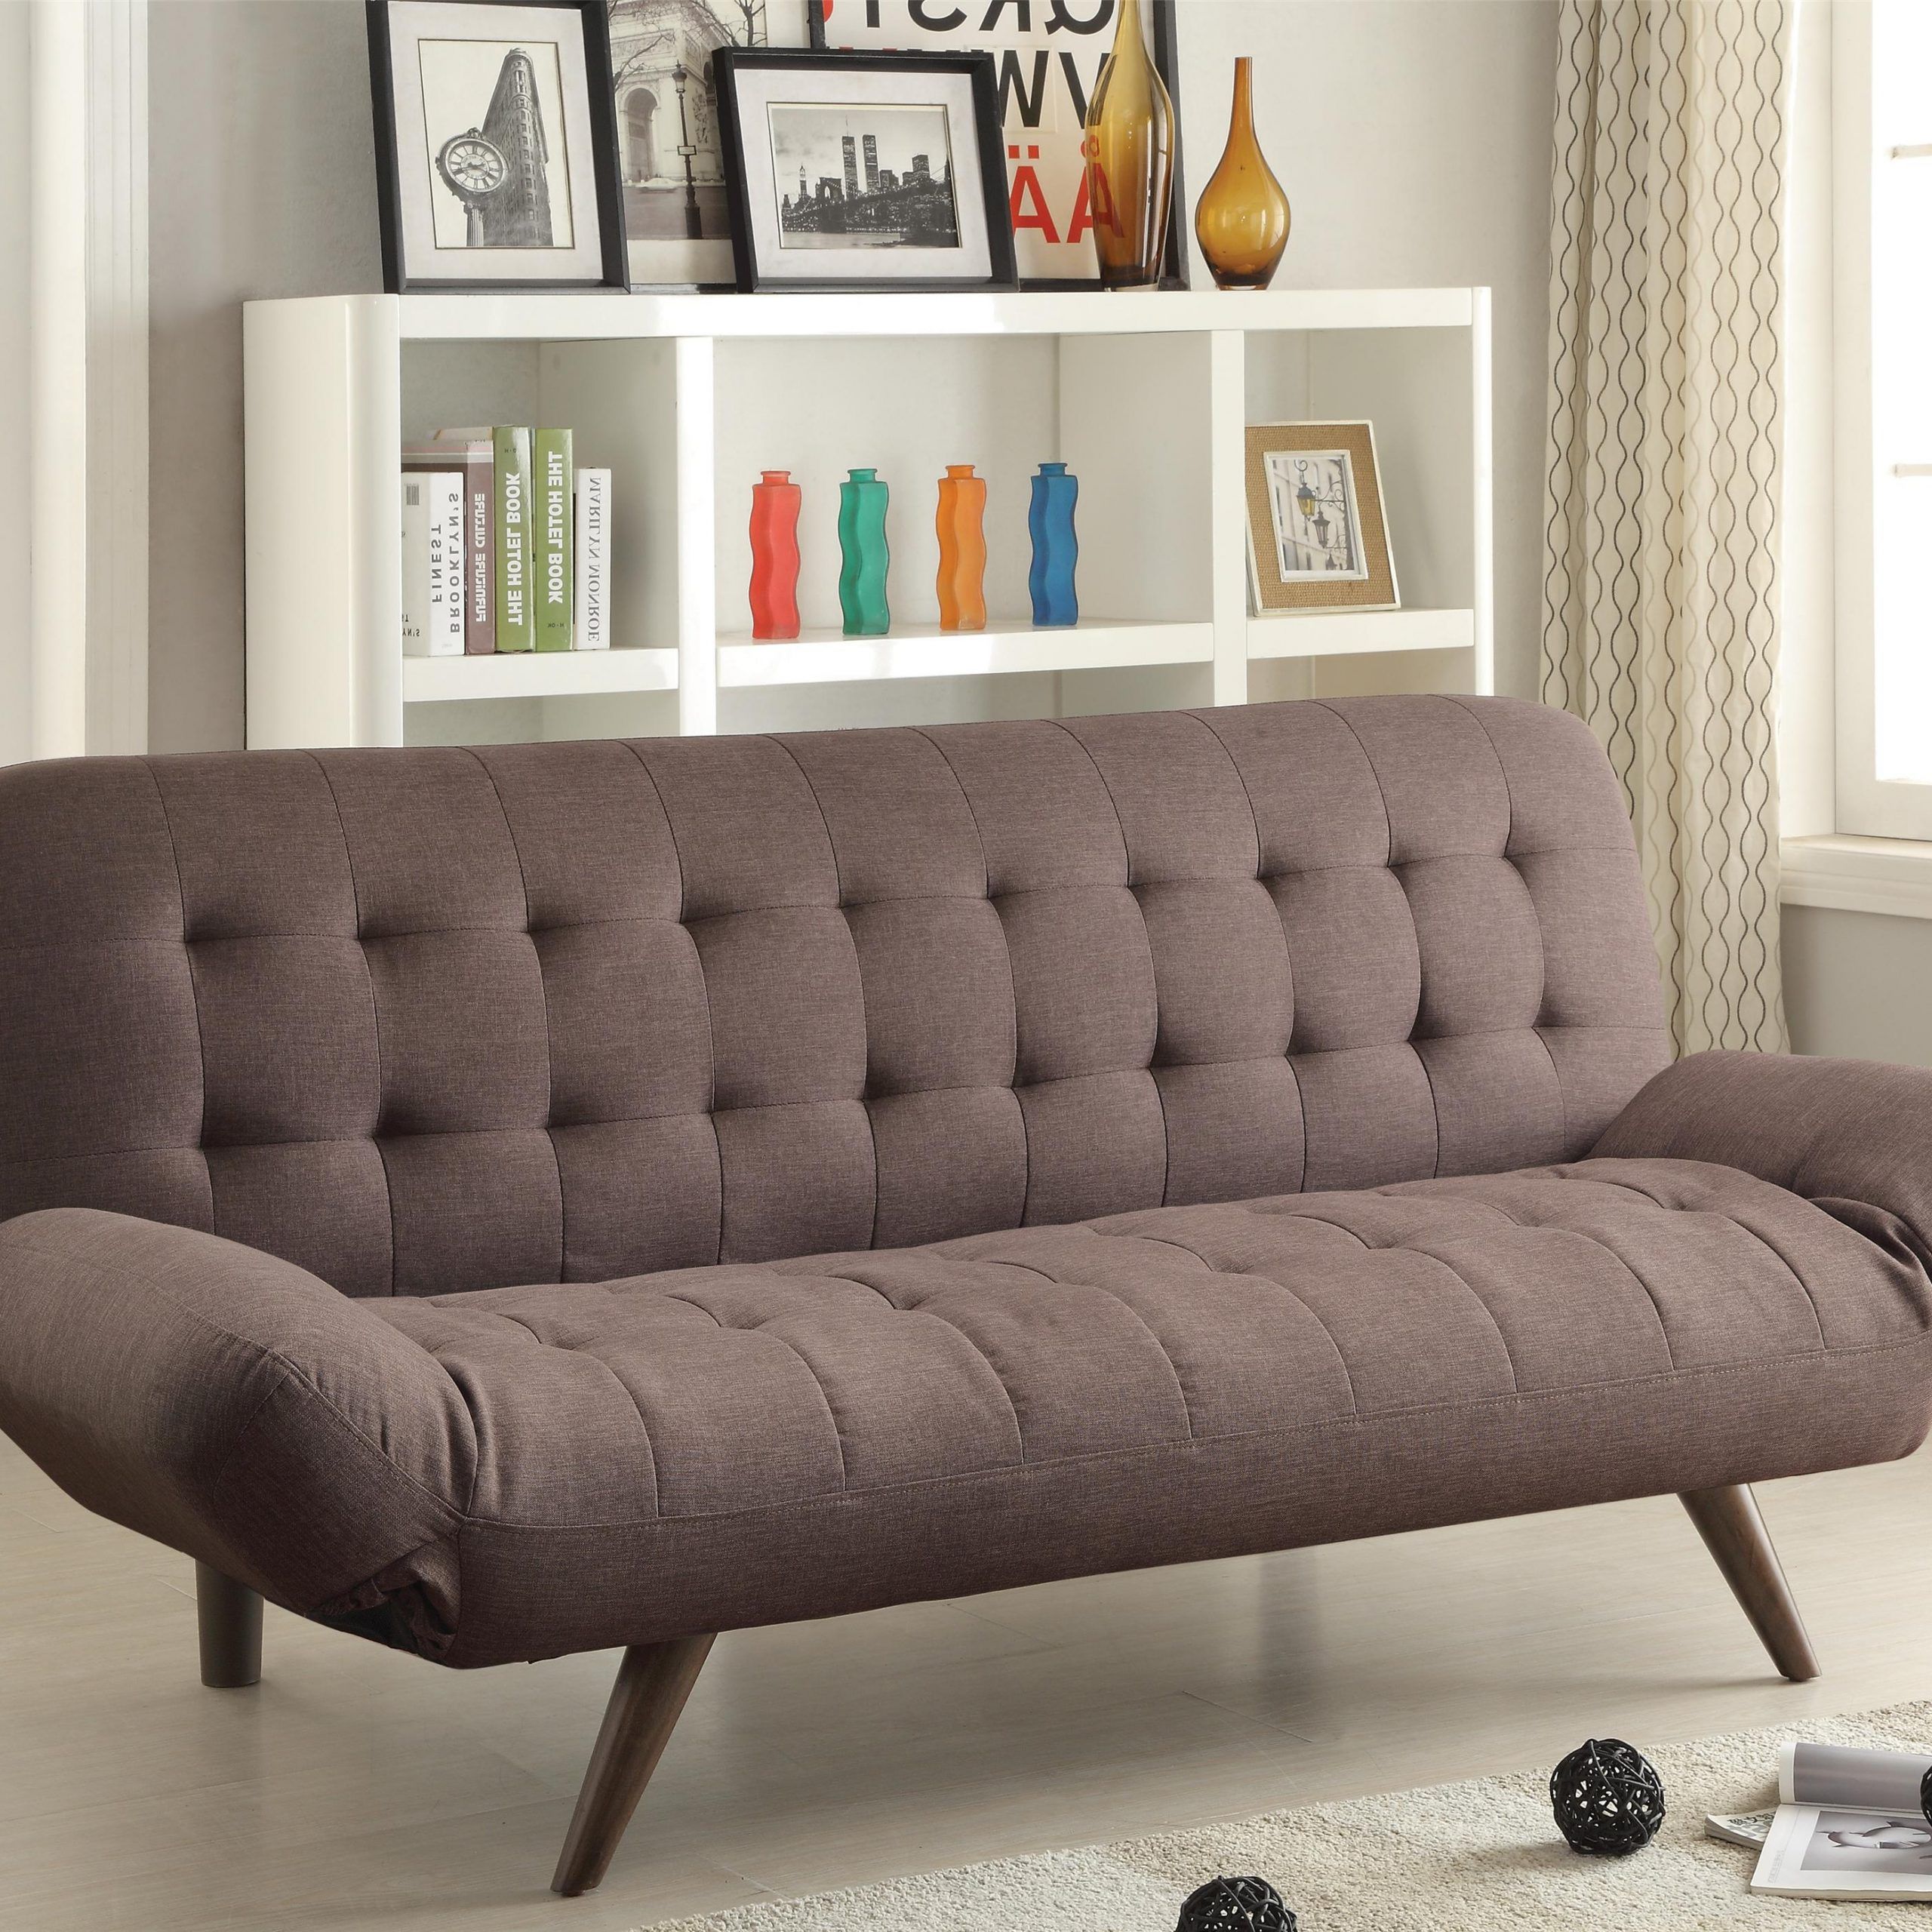 Sofa Beds And Futons Retro Modern Sofa Bed With Tufting Regarding Most Popular Easton Small Space Sectional Futon Sofas (View 8 of 20)